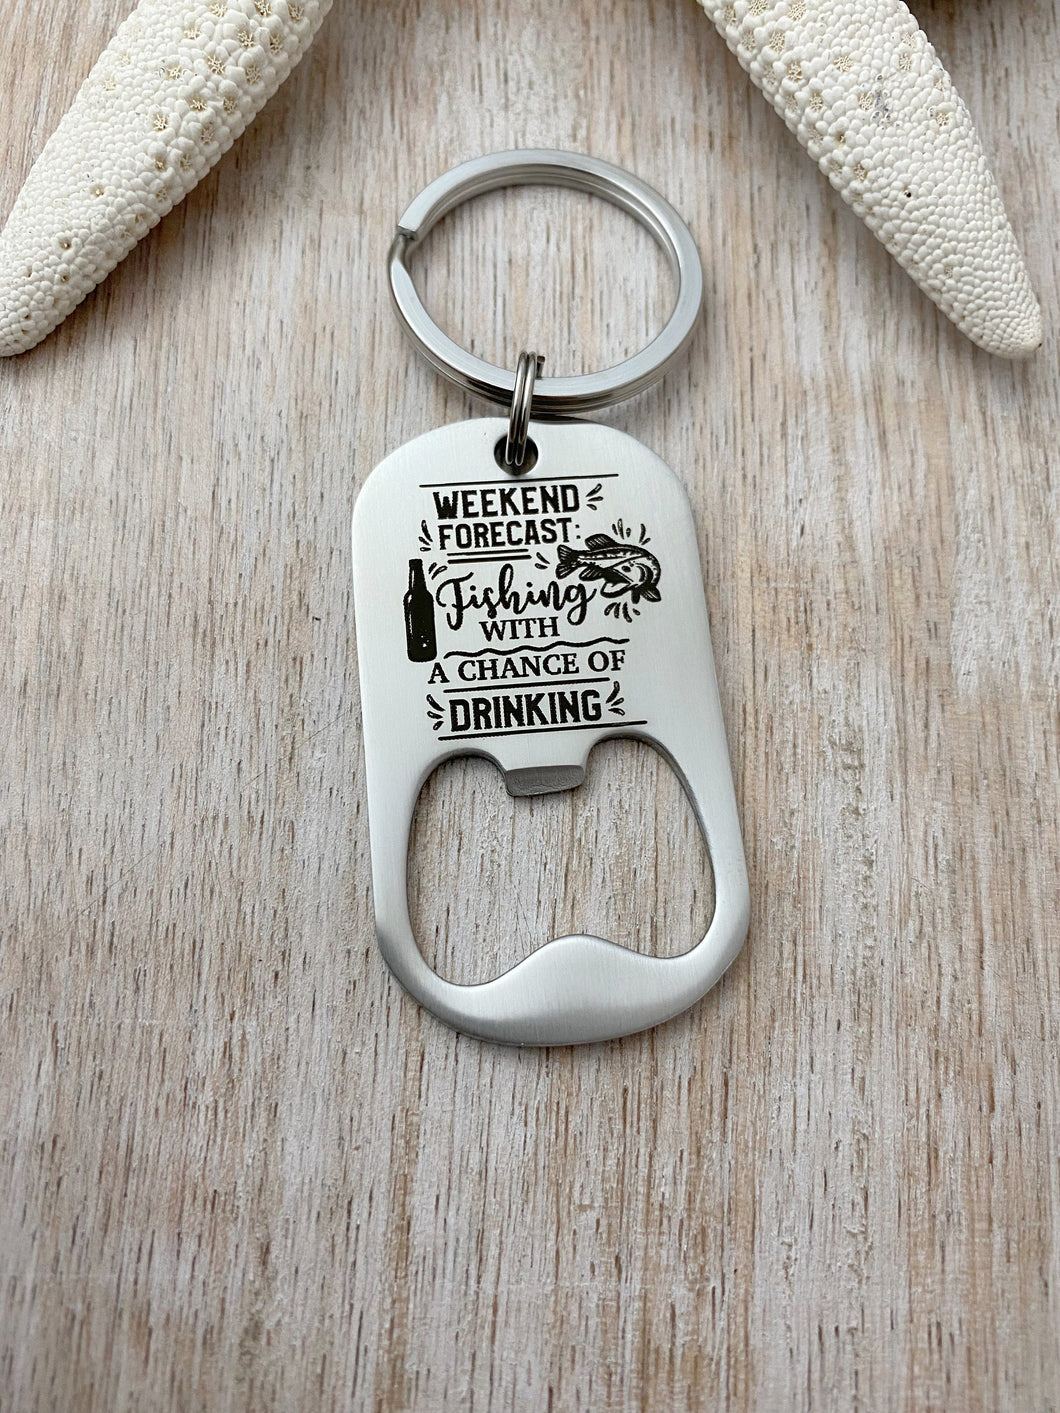 weekend forecast fishing with a chance of drinking - funny engraved stainless steel beer bottle opener keychain - gift for husband